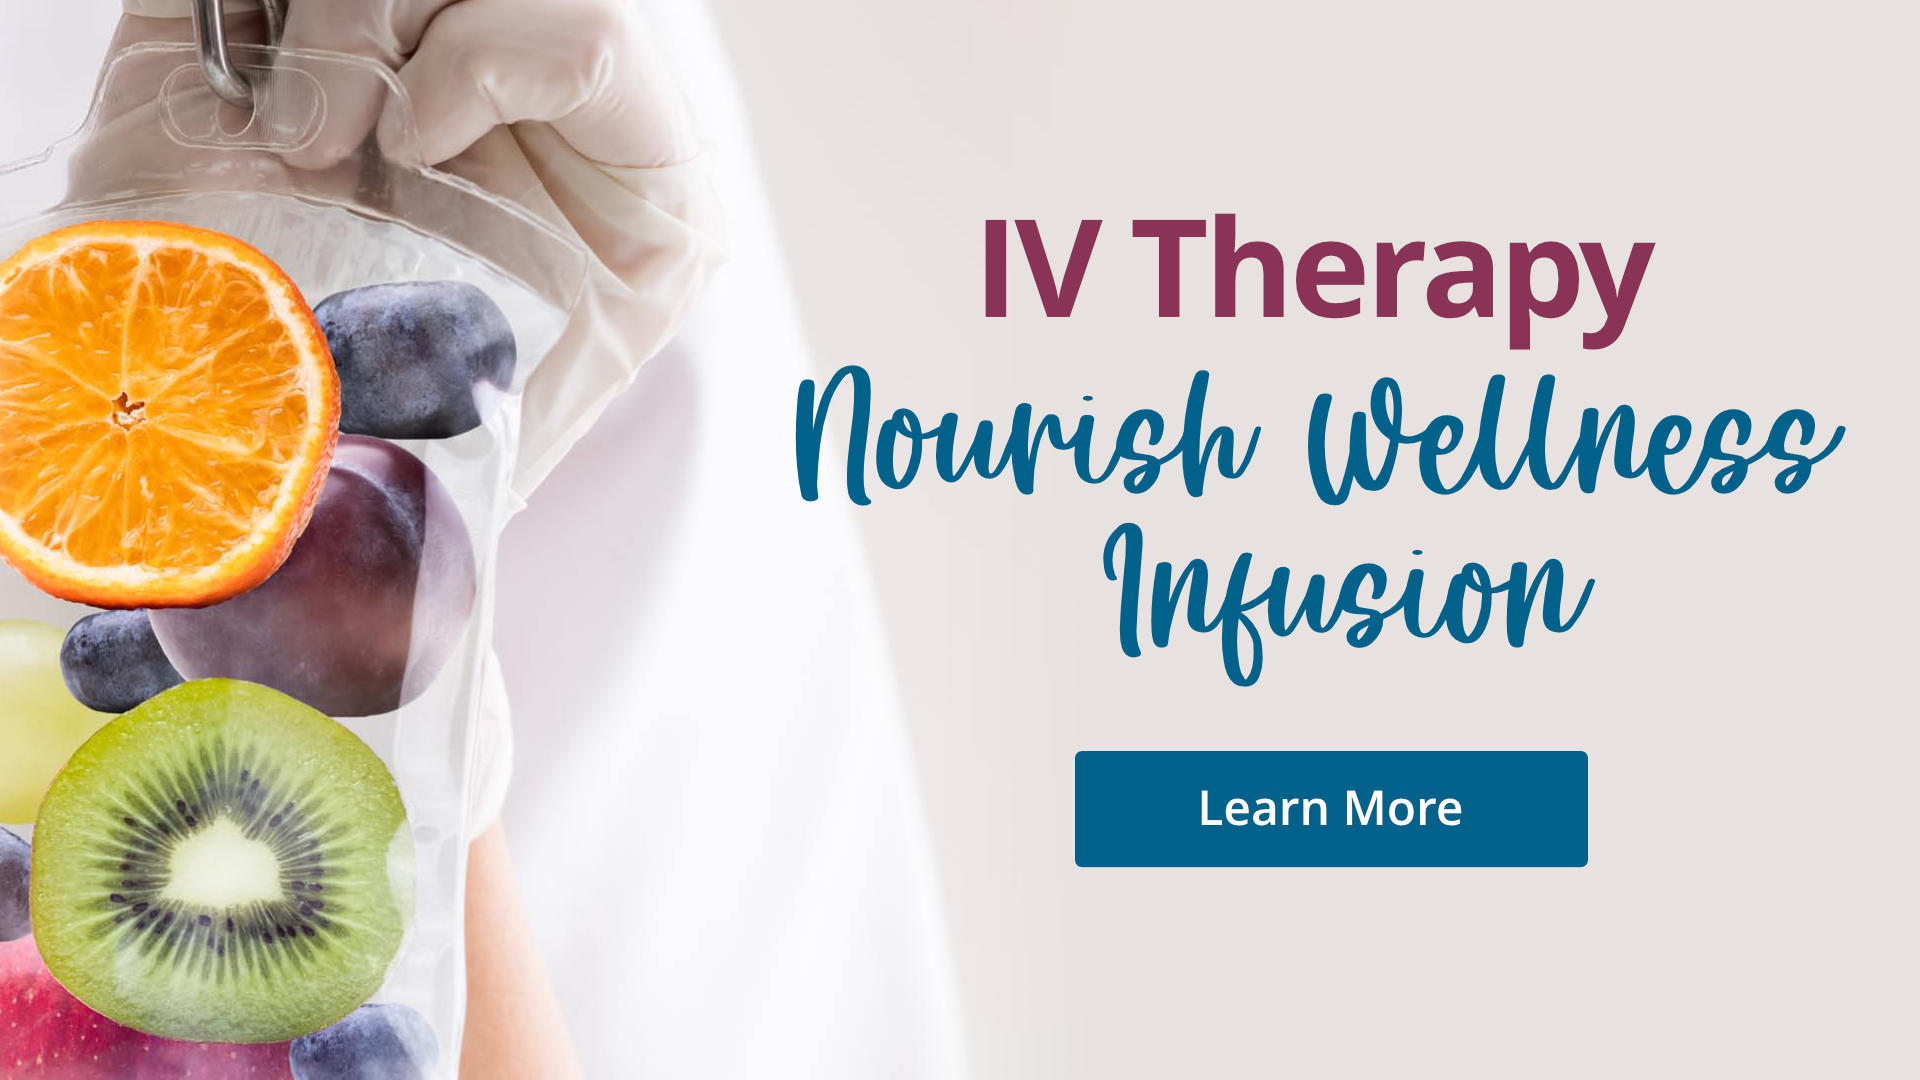 IV Therapy: Learn More